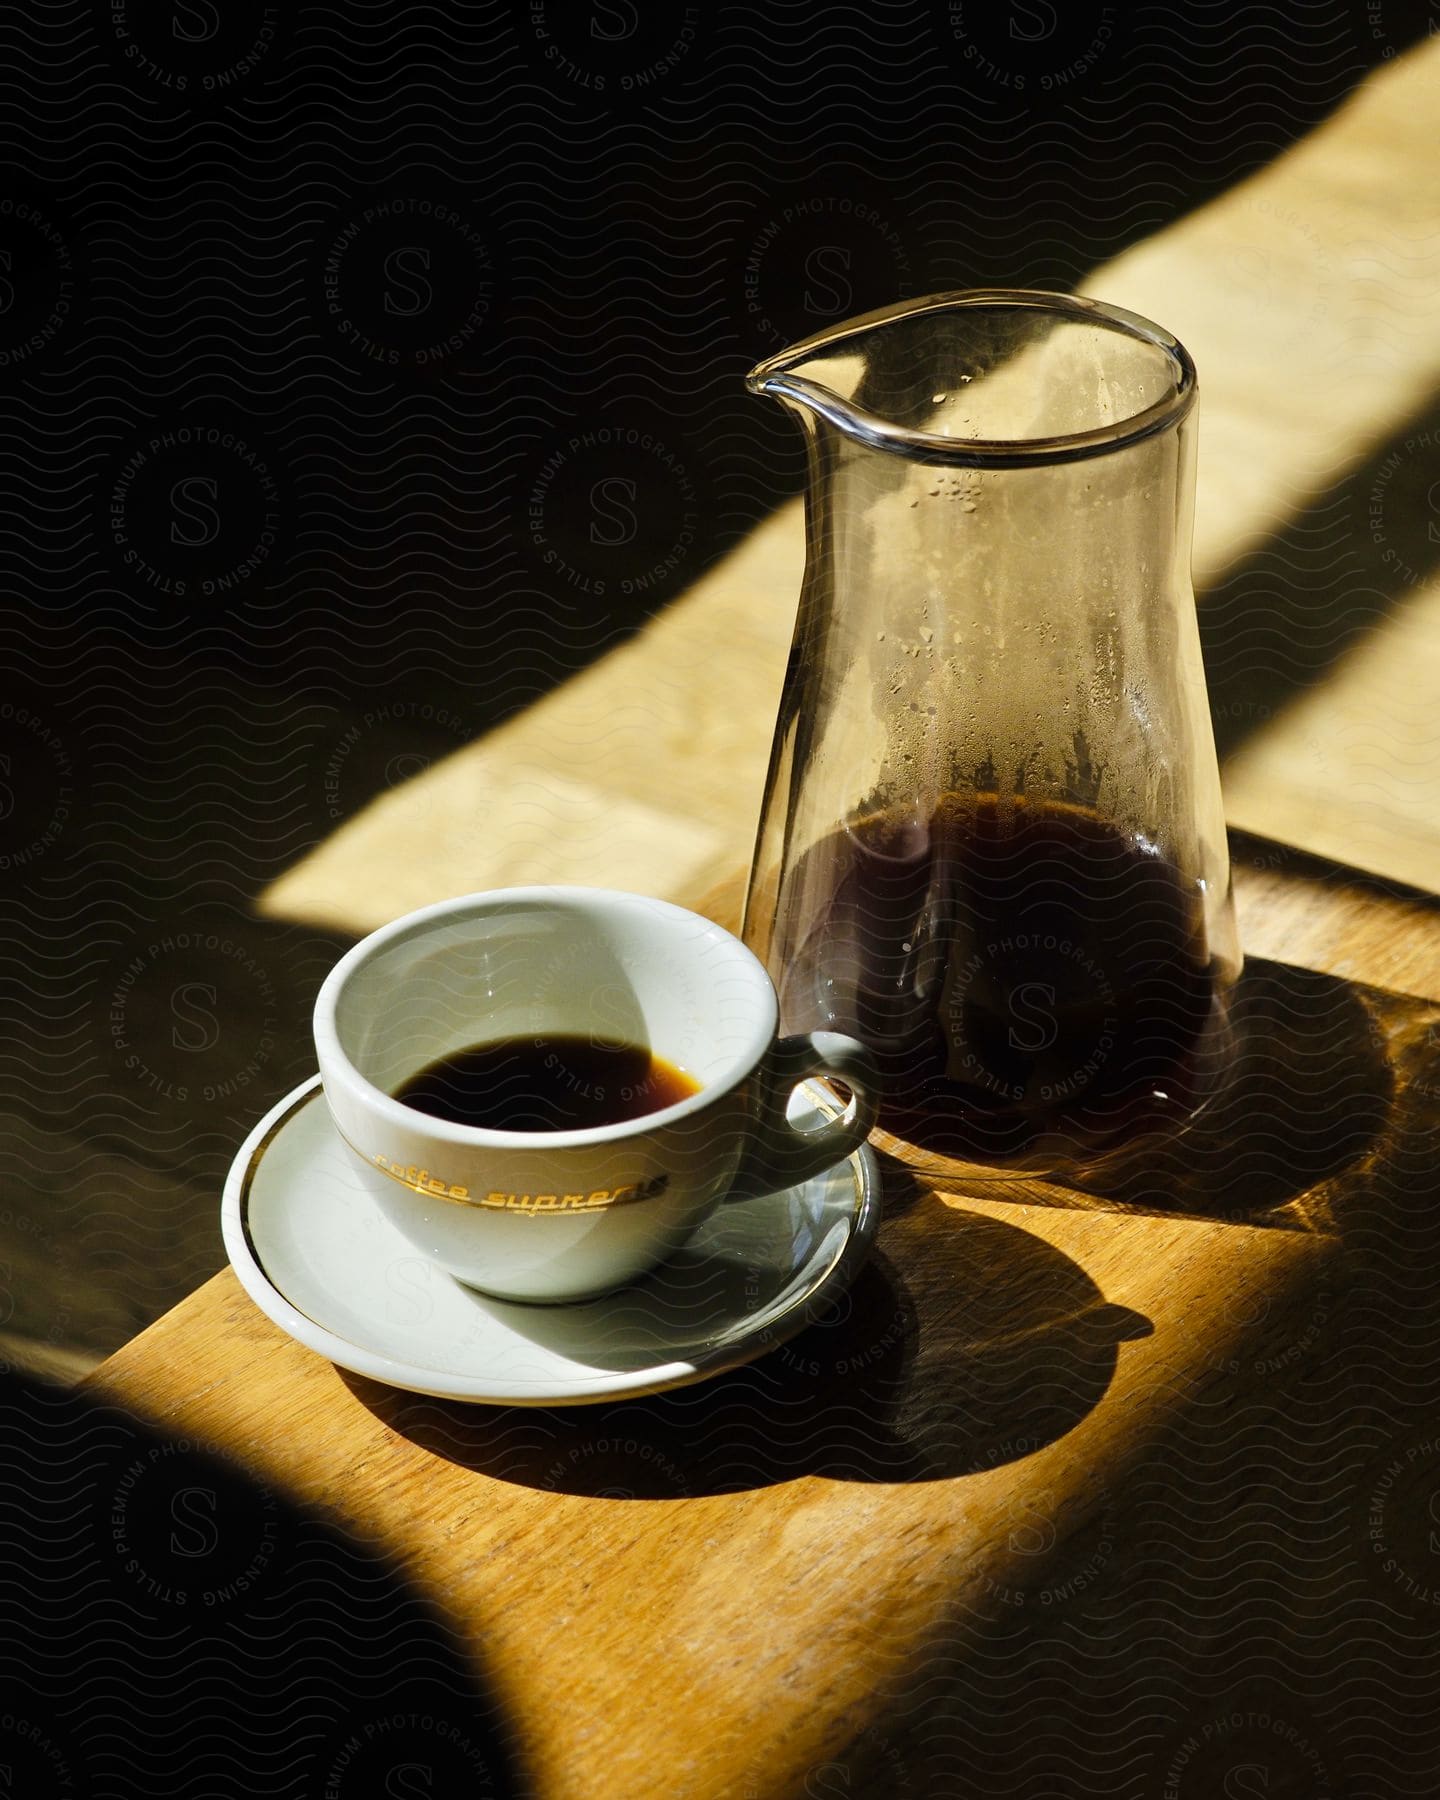 A white coffee cup with saucer and a glass carafe on a wooden surface.